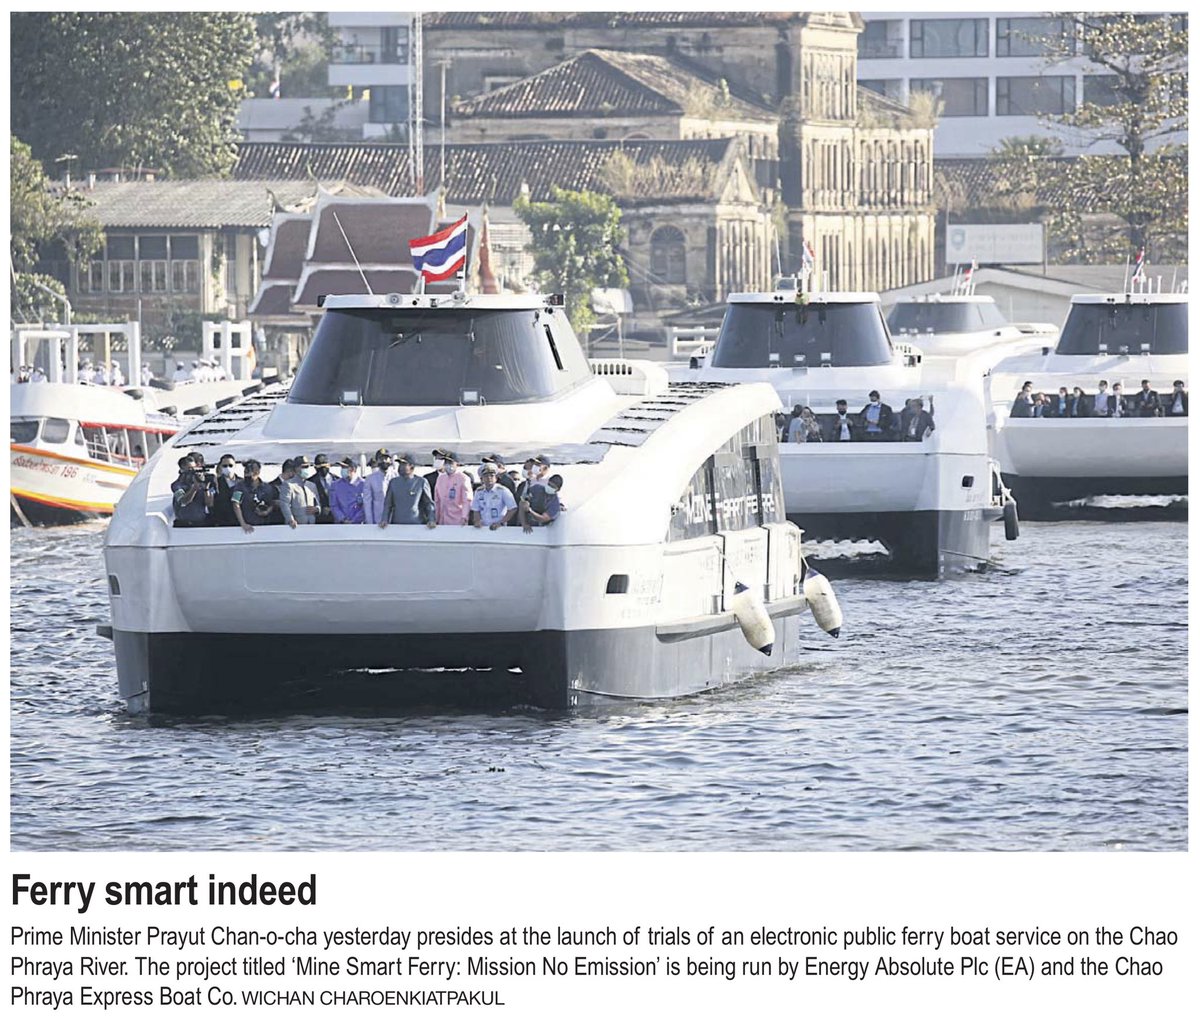 Bangkok Post: The PM yesterday presided at the launch of trials of an electronic public ferry boat service on the Chao Phraya River. The project titled ‘Mine Smart Ferry: Mission No Emission’ is being run by Energy Absolute Plc (EA) and the Chao Phraya Express Boat Co.  #Bangkok